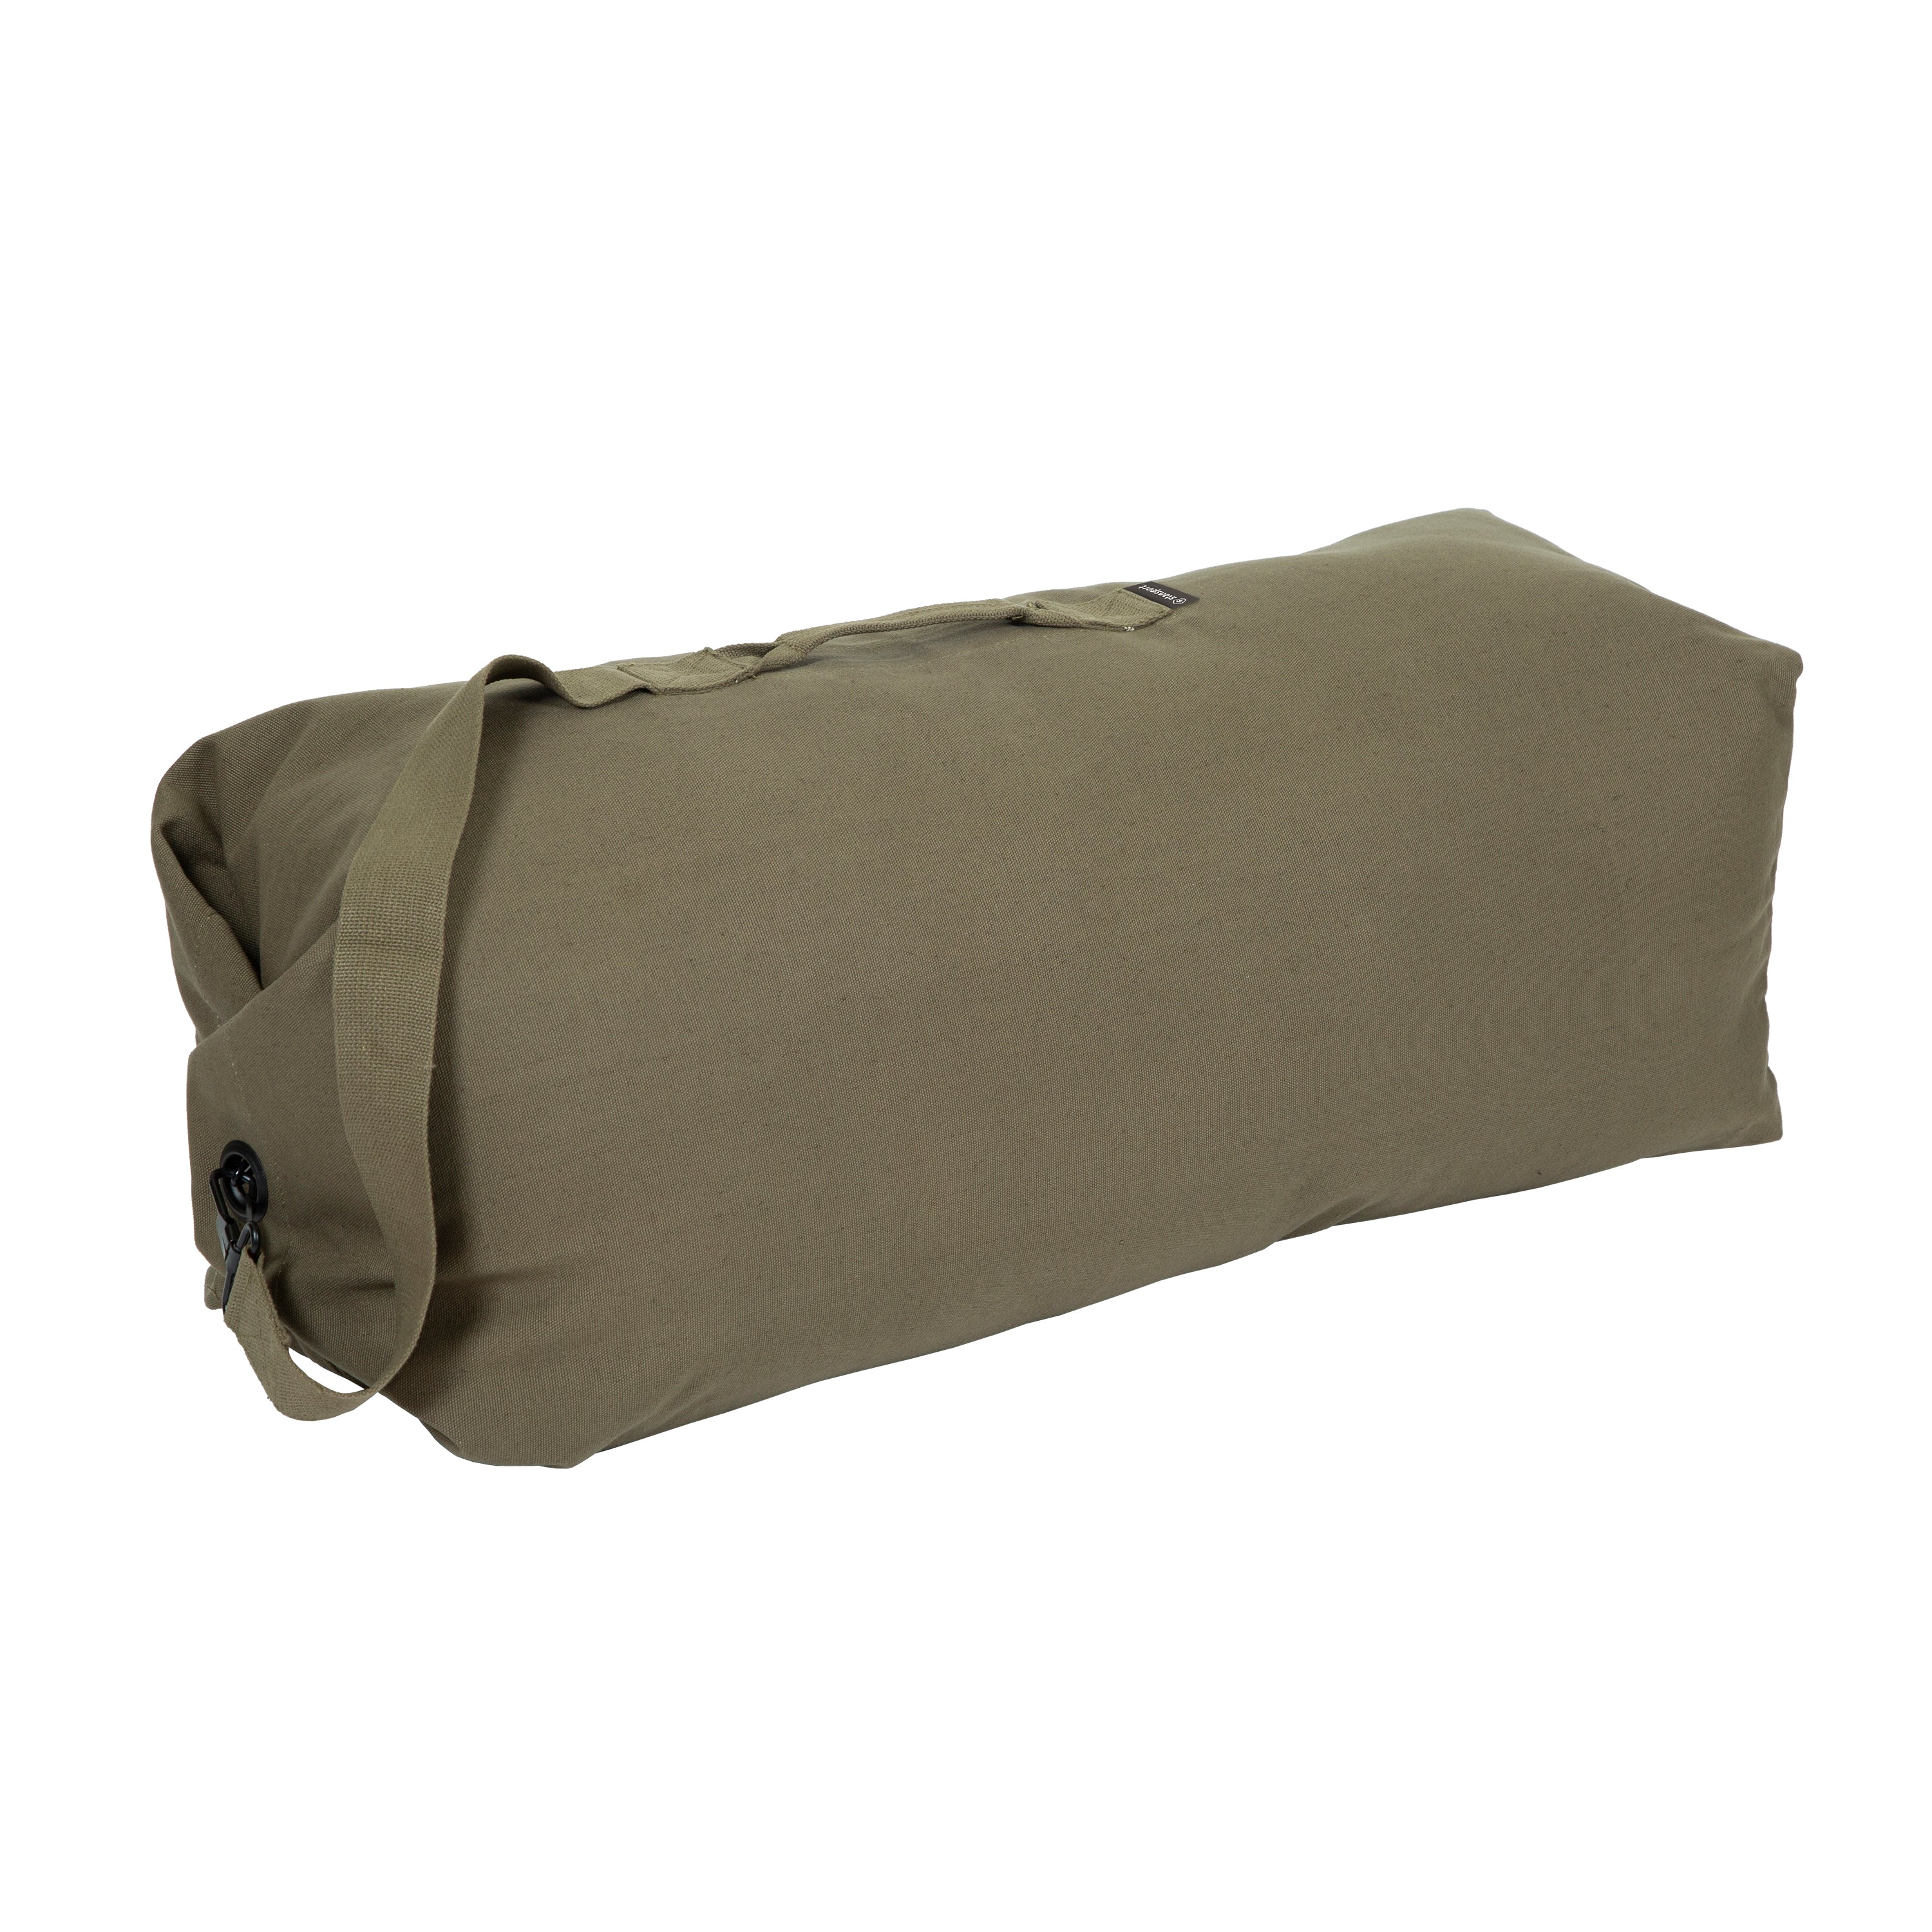 Duffel Bag With Strap - O.D. - 36 In X 10 In X 10 In